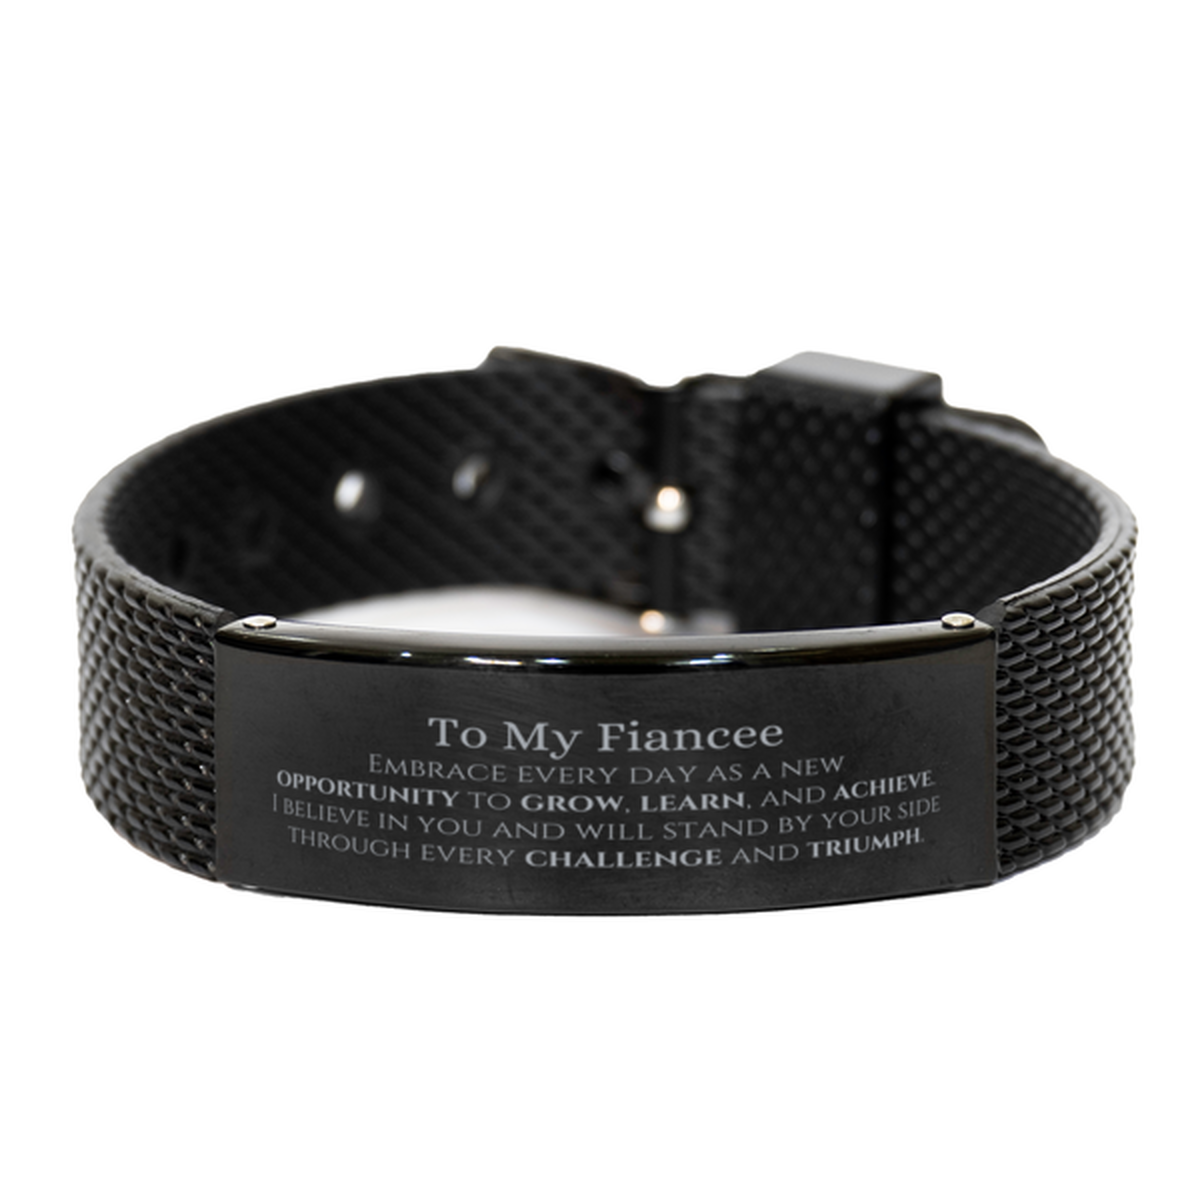 To My Fiancee Gifts, I believe in you and will stand by your side, Inspirational Black Shark Mesh Bracelet For Fiancee, Birthday Christmas Motivational Fiancee Gifts